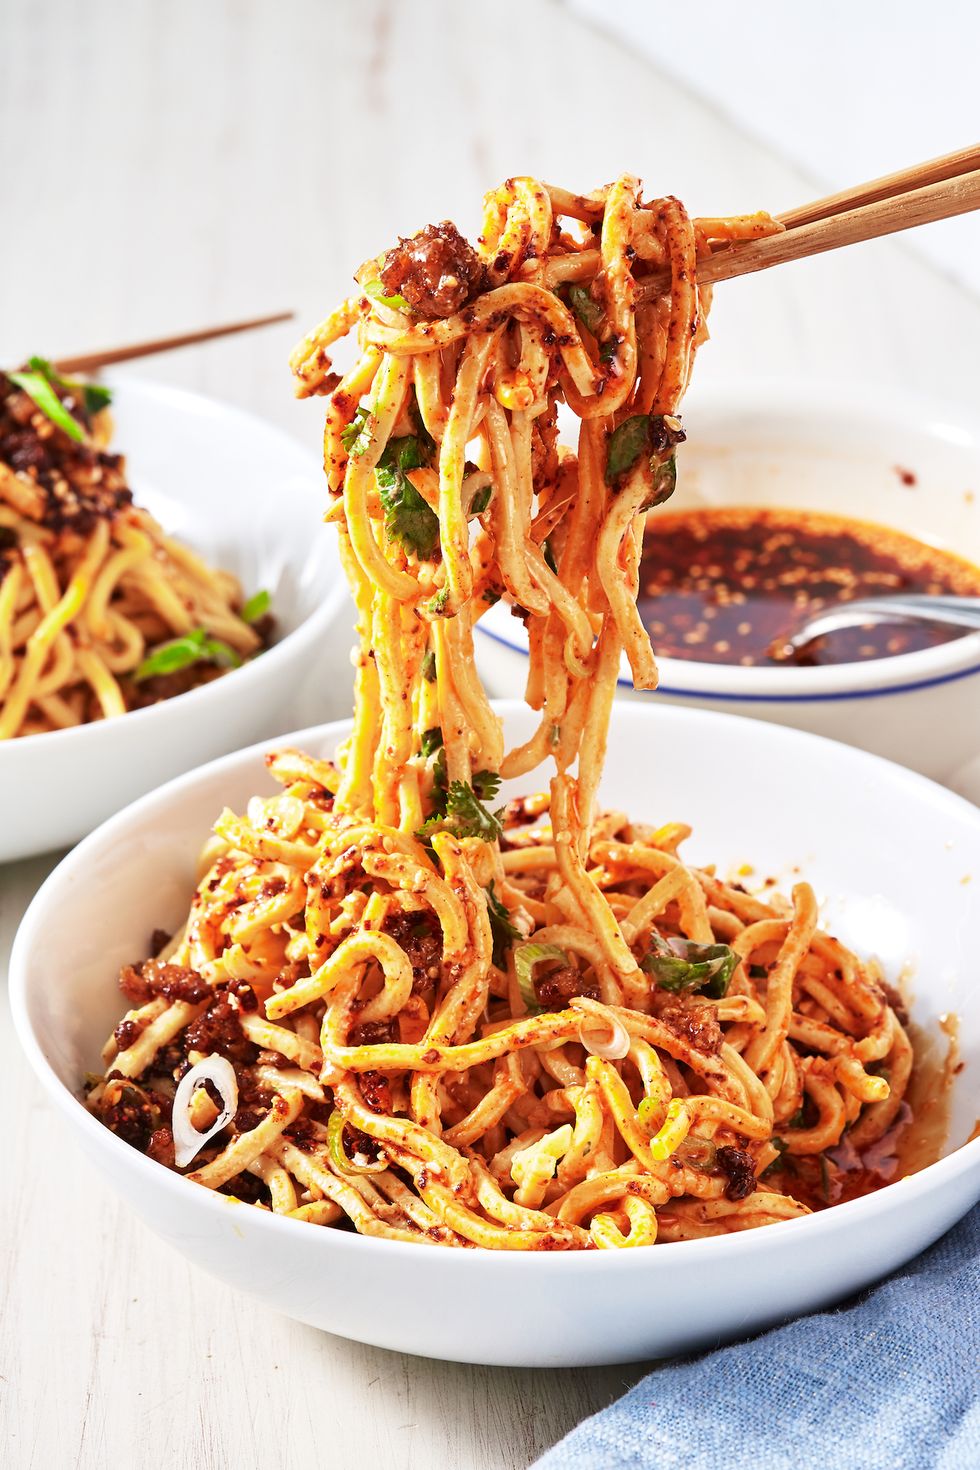 Dish, Food, Cuisine, Fried noodles, Noodle, Hot dry noodles, Chow mein, Bigoli, Ingredient, Spaghetti, 